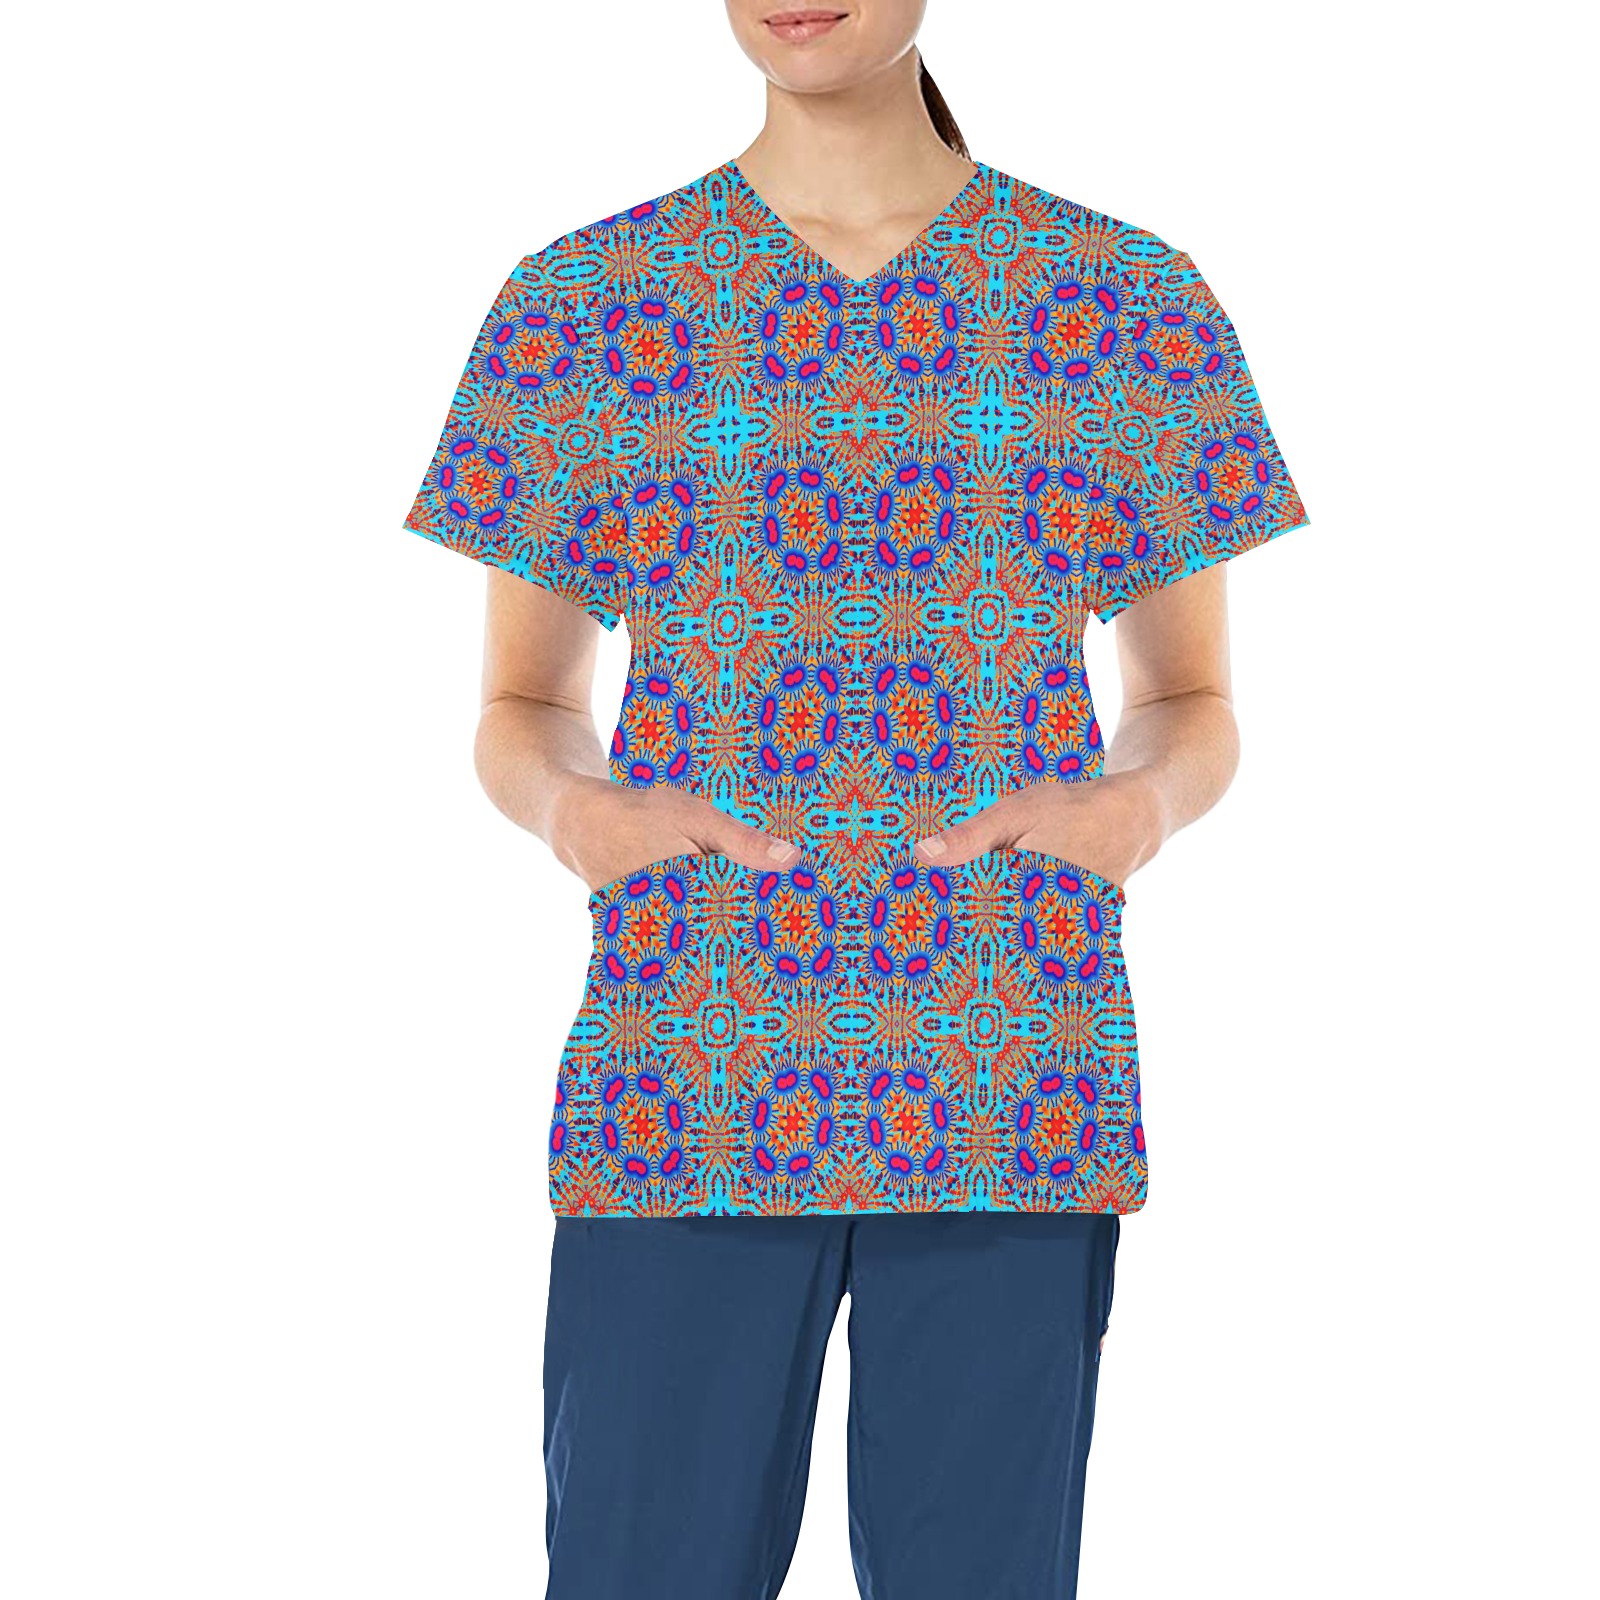 nell All Over Print Scrub Top